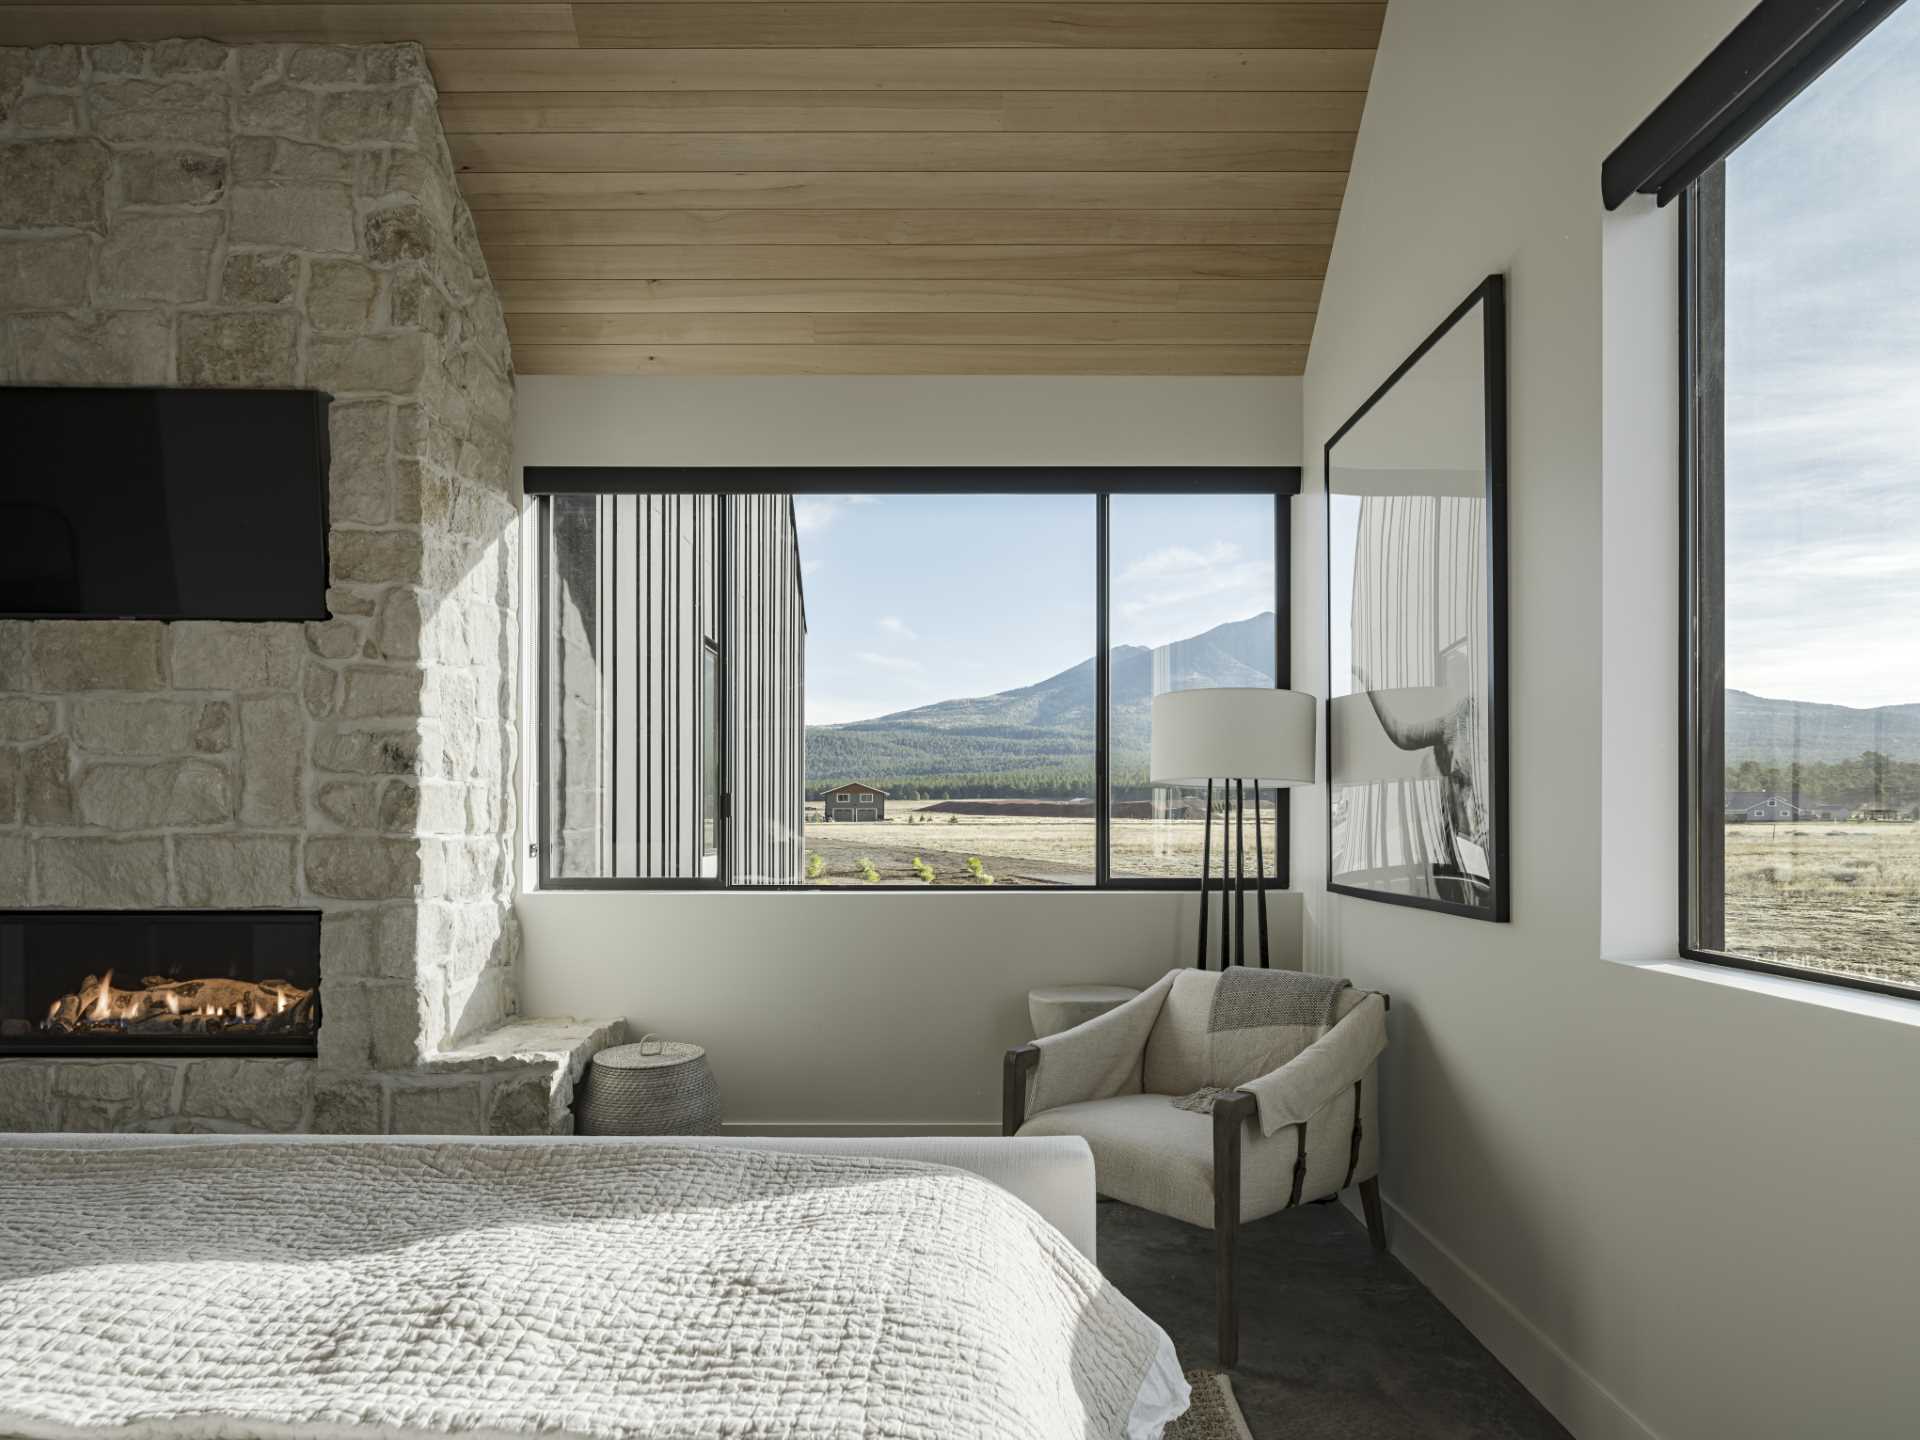 A modern bedroom with a stone wall, fireplace, and mountain views.